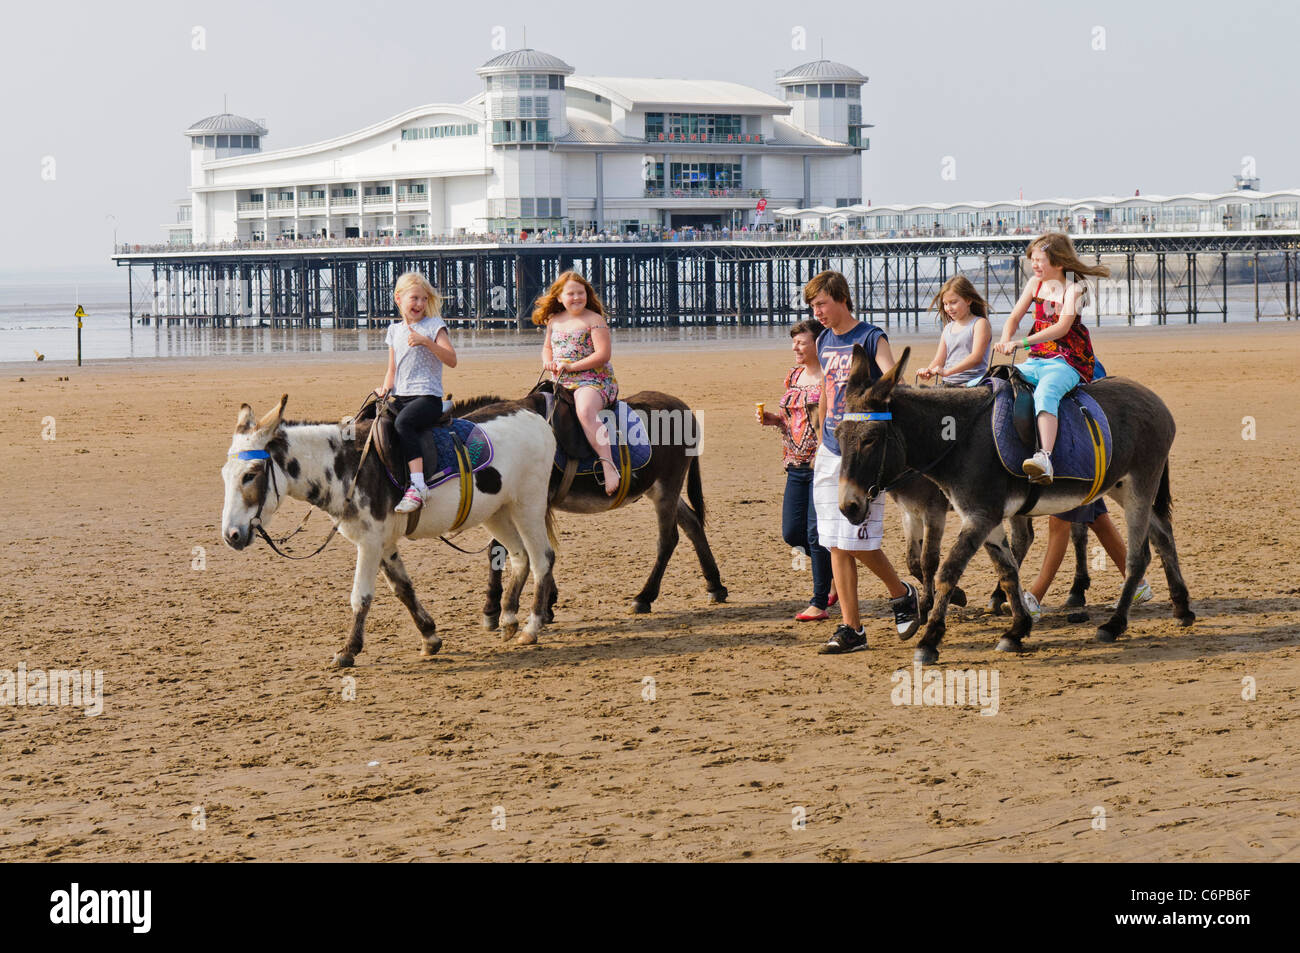 Children riding donkeys on the beach at the English seaside town of Weston Super Mare Stock Photo